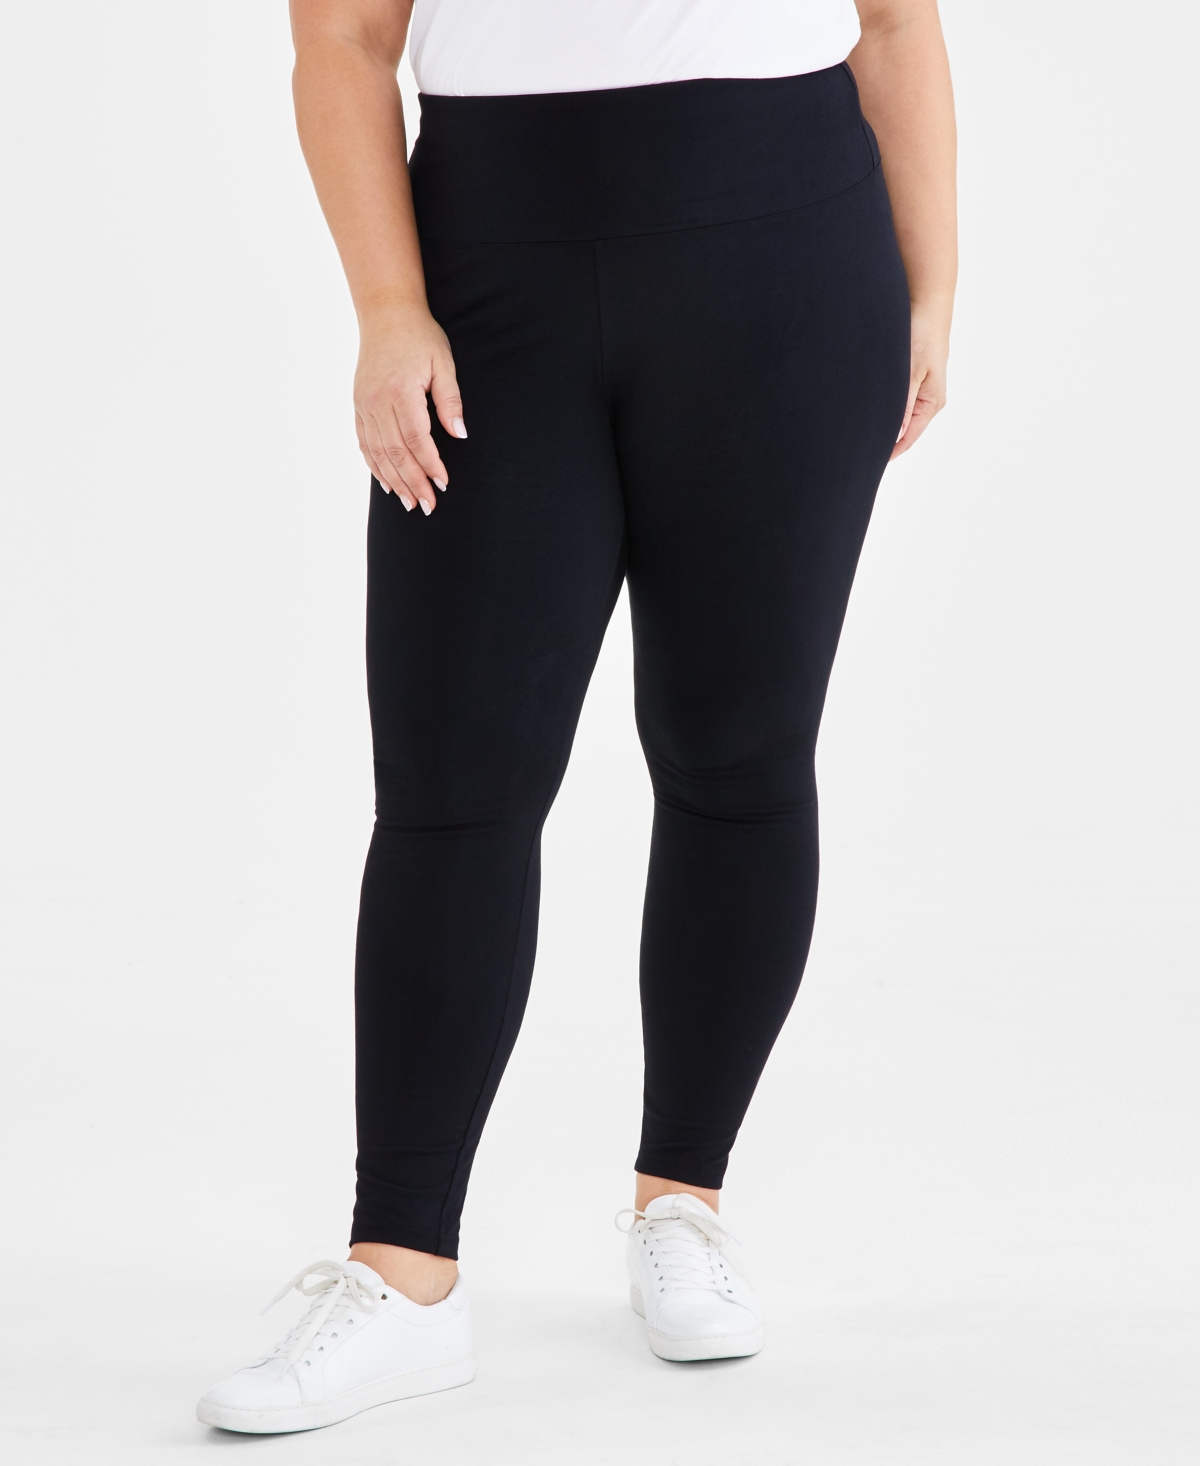 STYLE & CO PLUS SIZE HIGH RISE LEGGINGS, CREATED FOR MACY'S